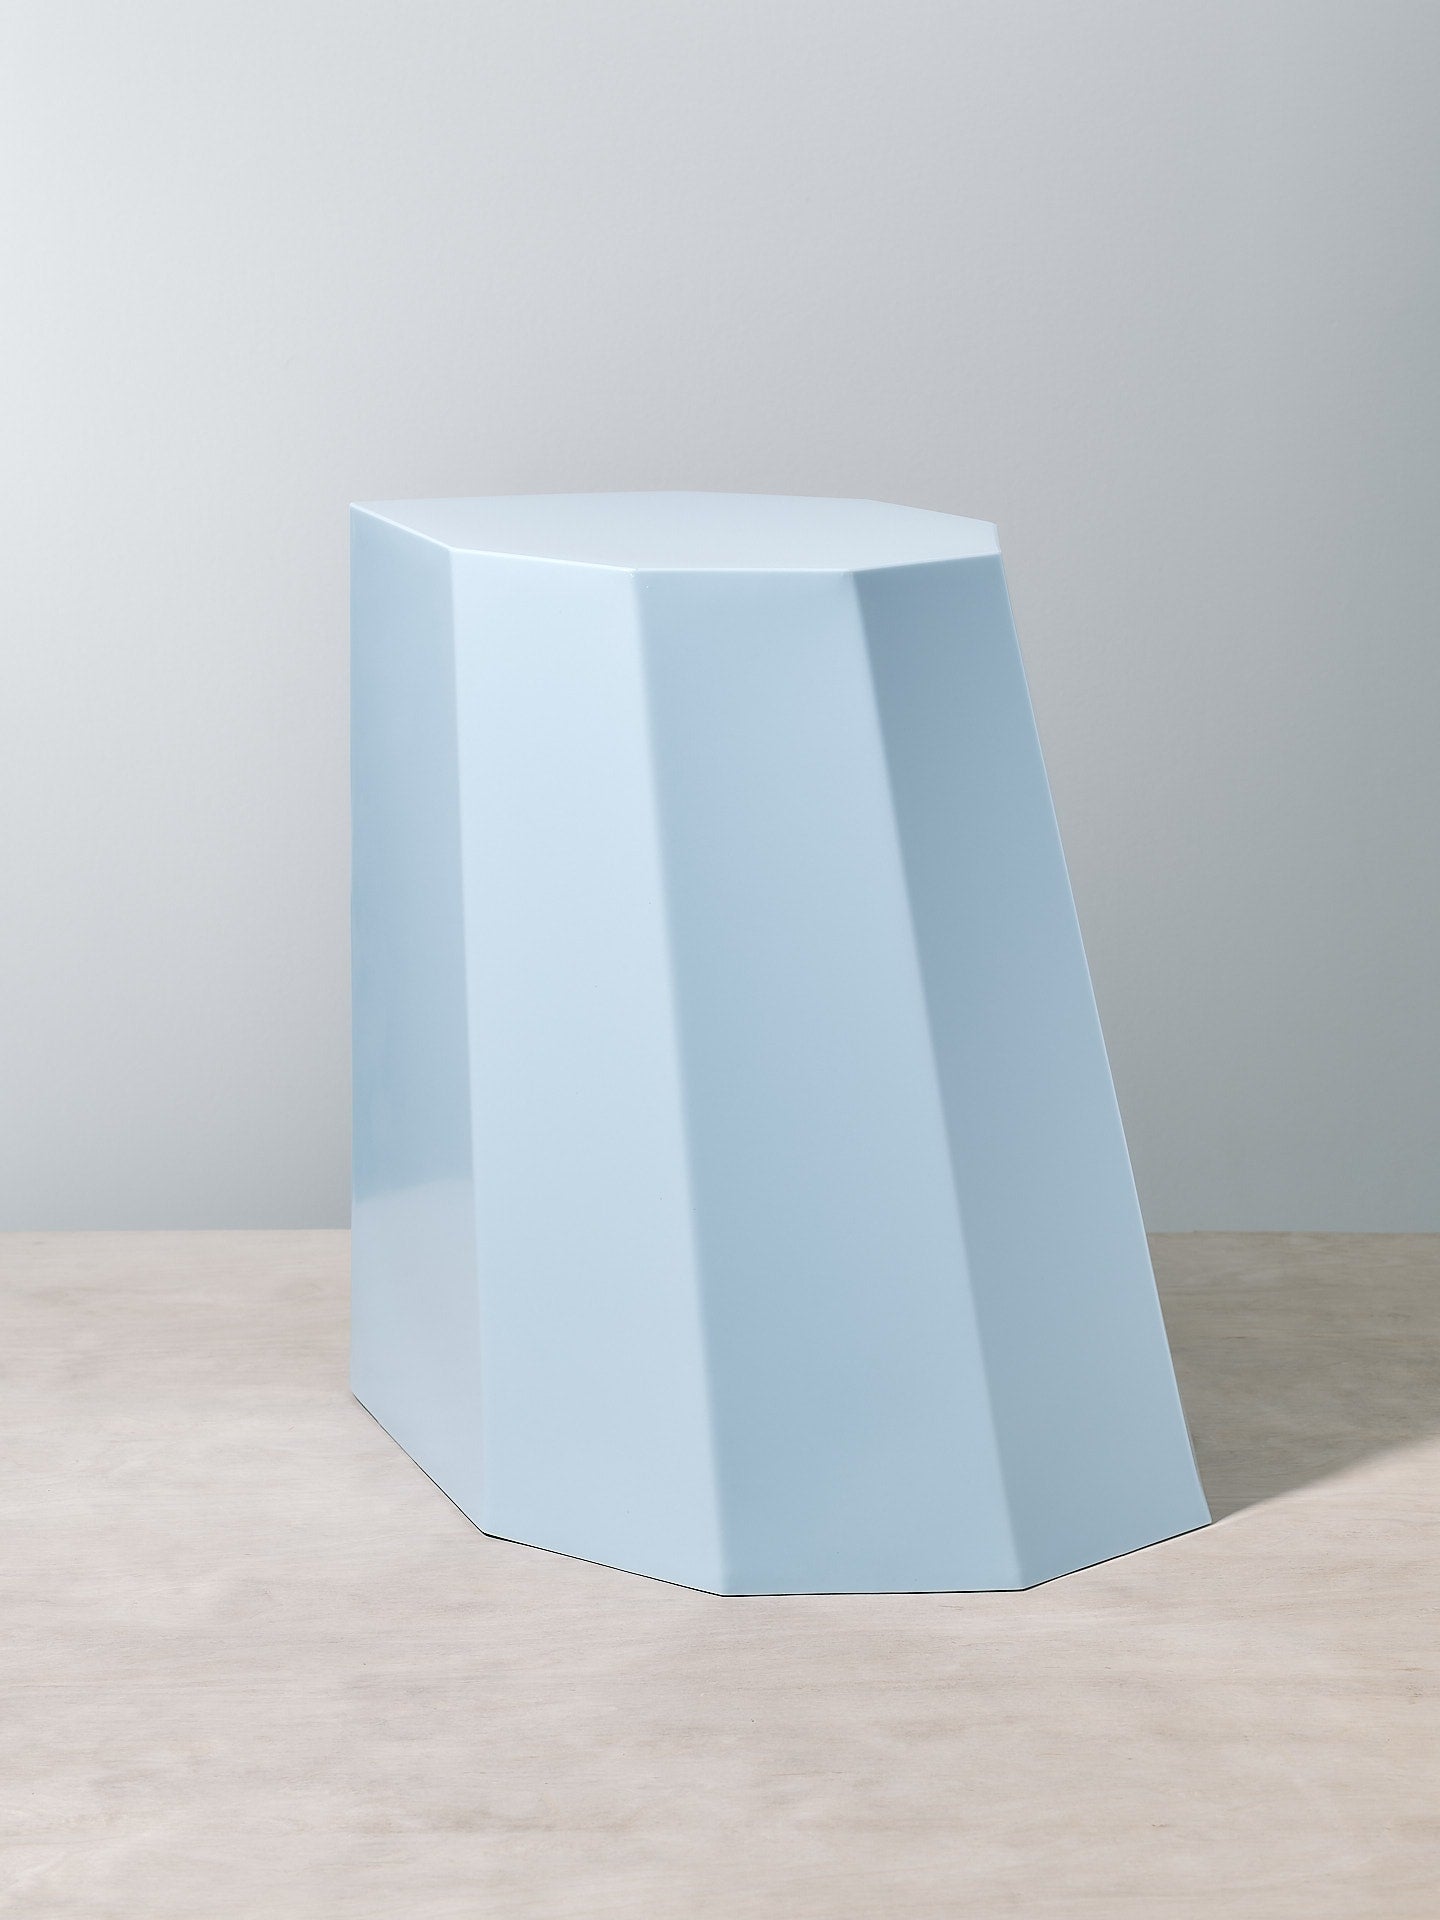 A Martino Gamper Baby Blue Arnold Circus Stool on top of a white table.